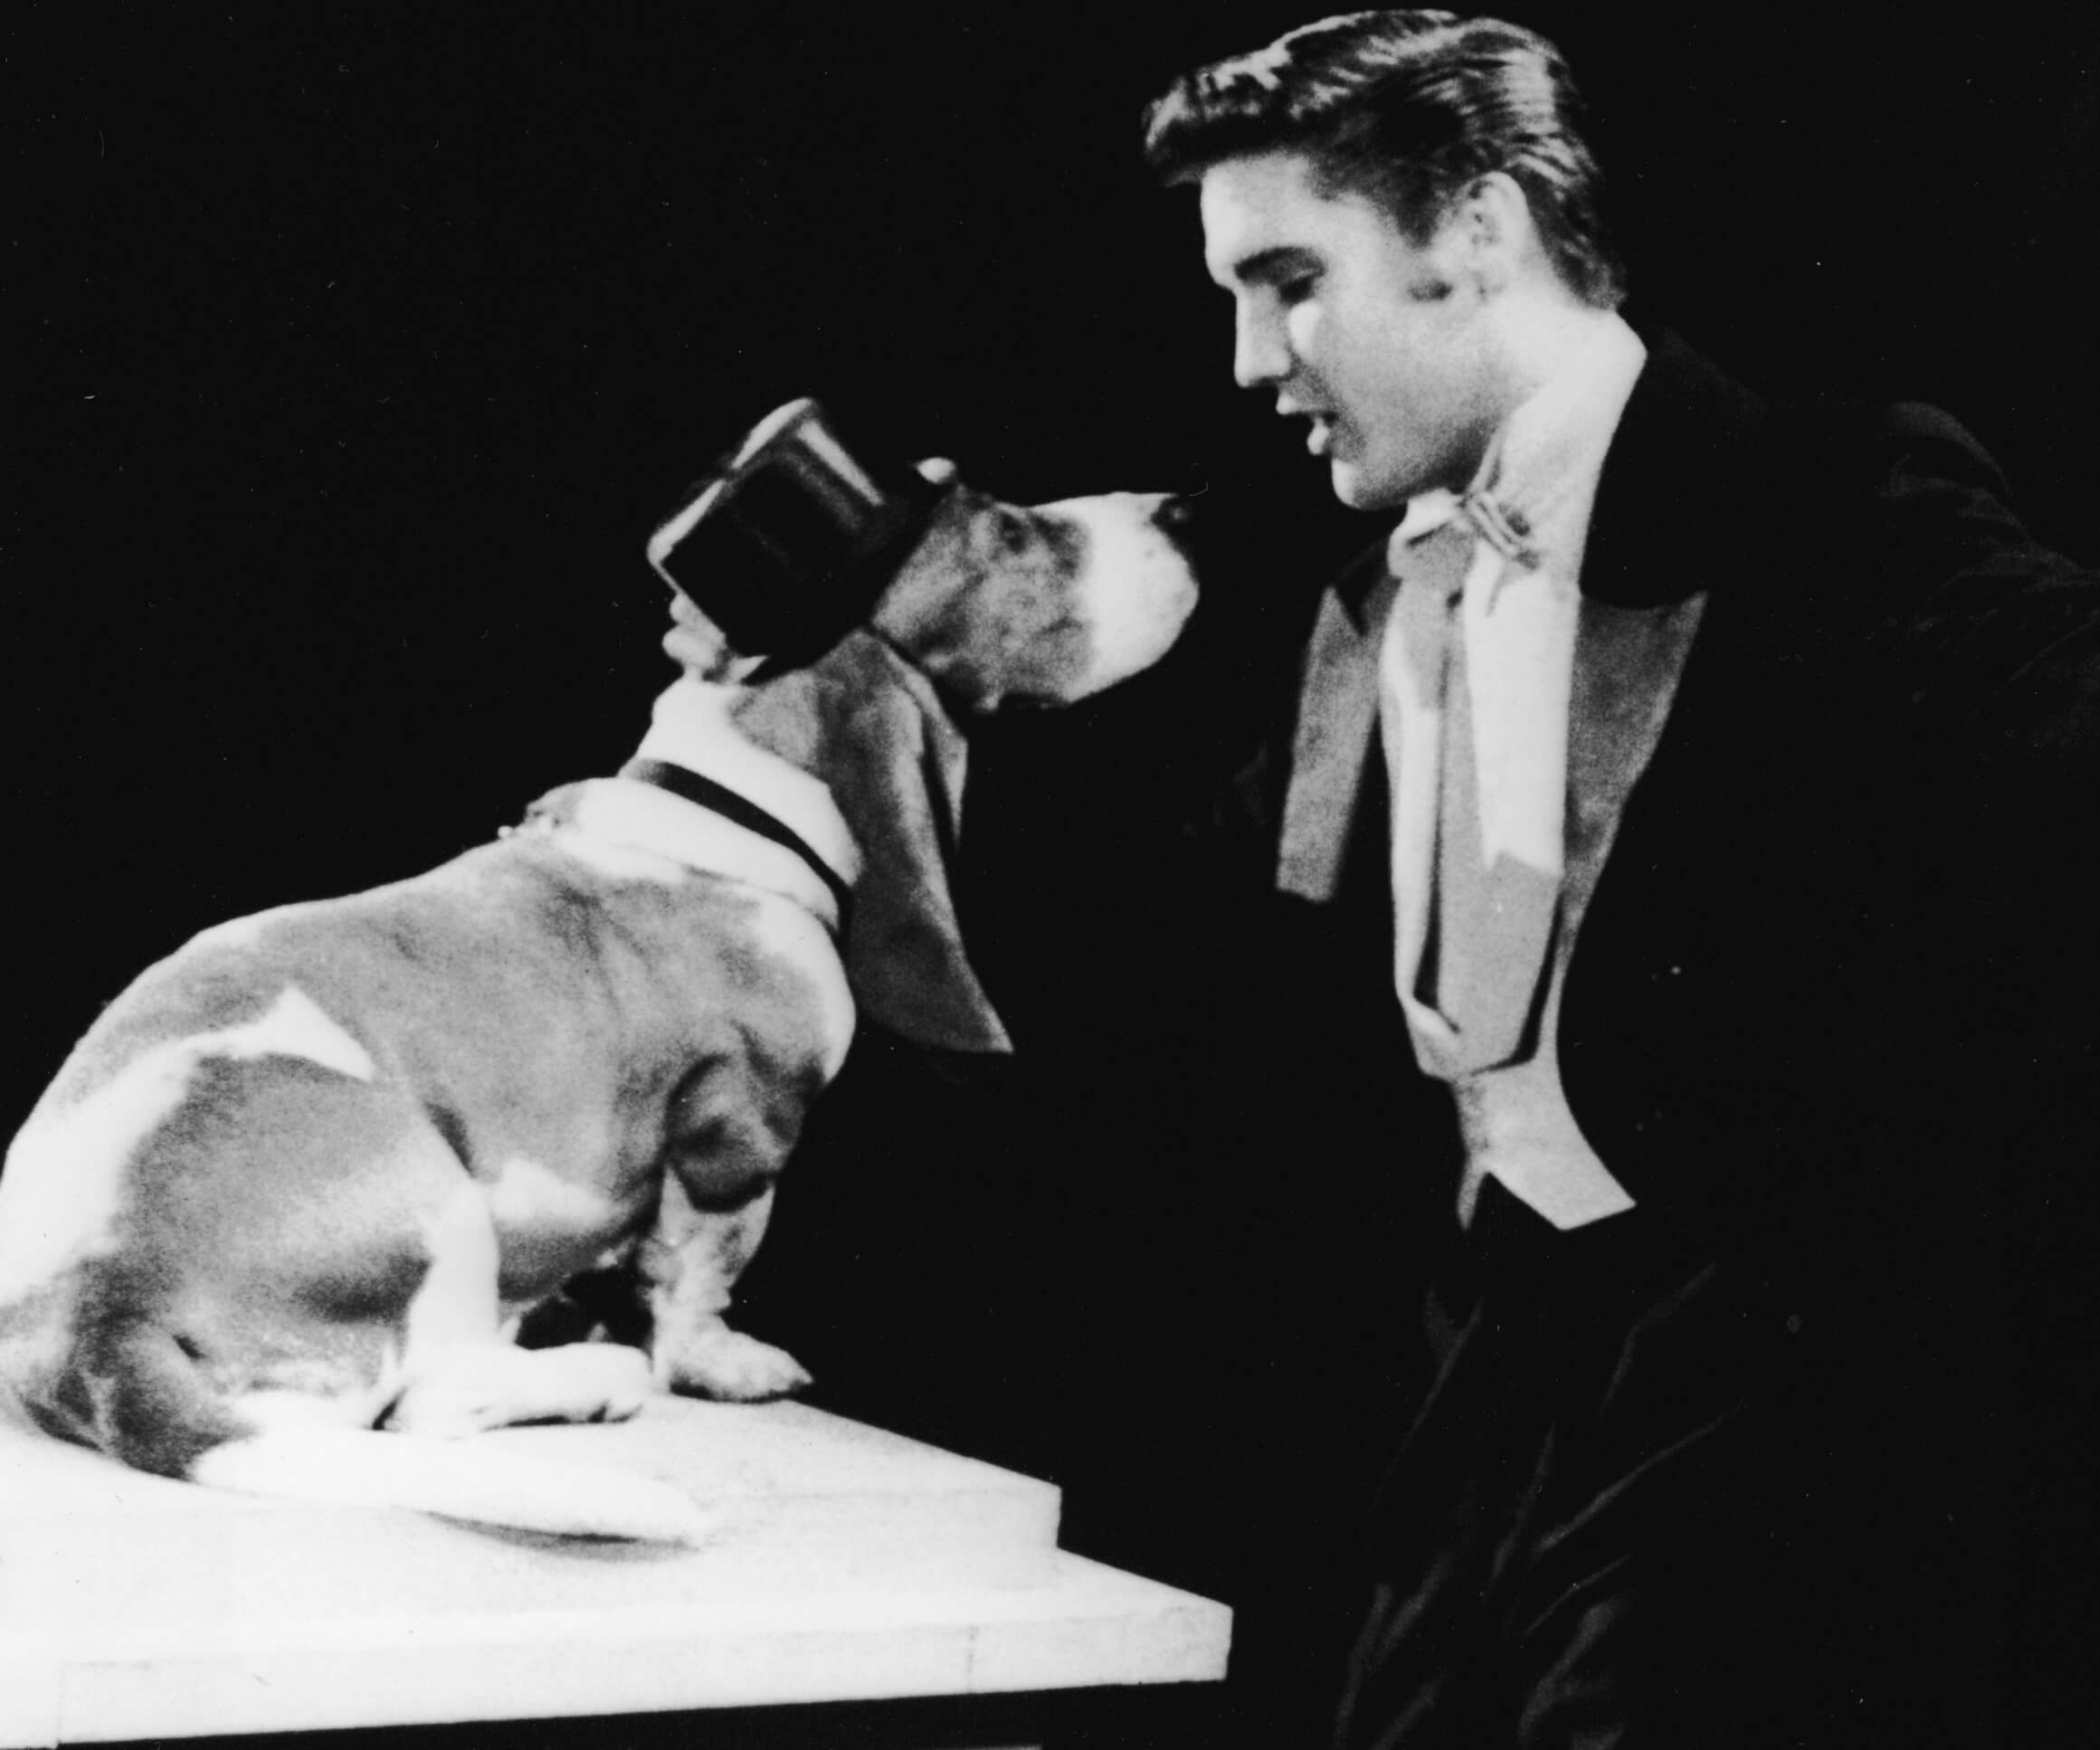 Elvis Presley performing with a hound dog